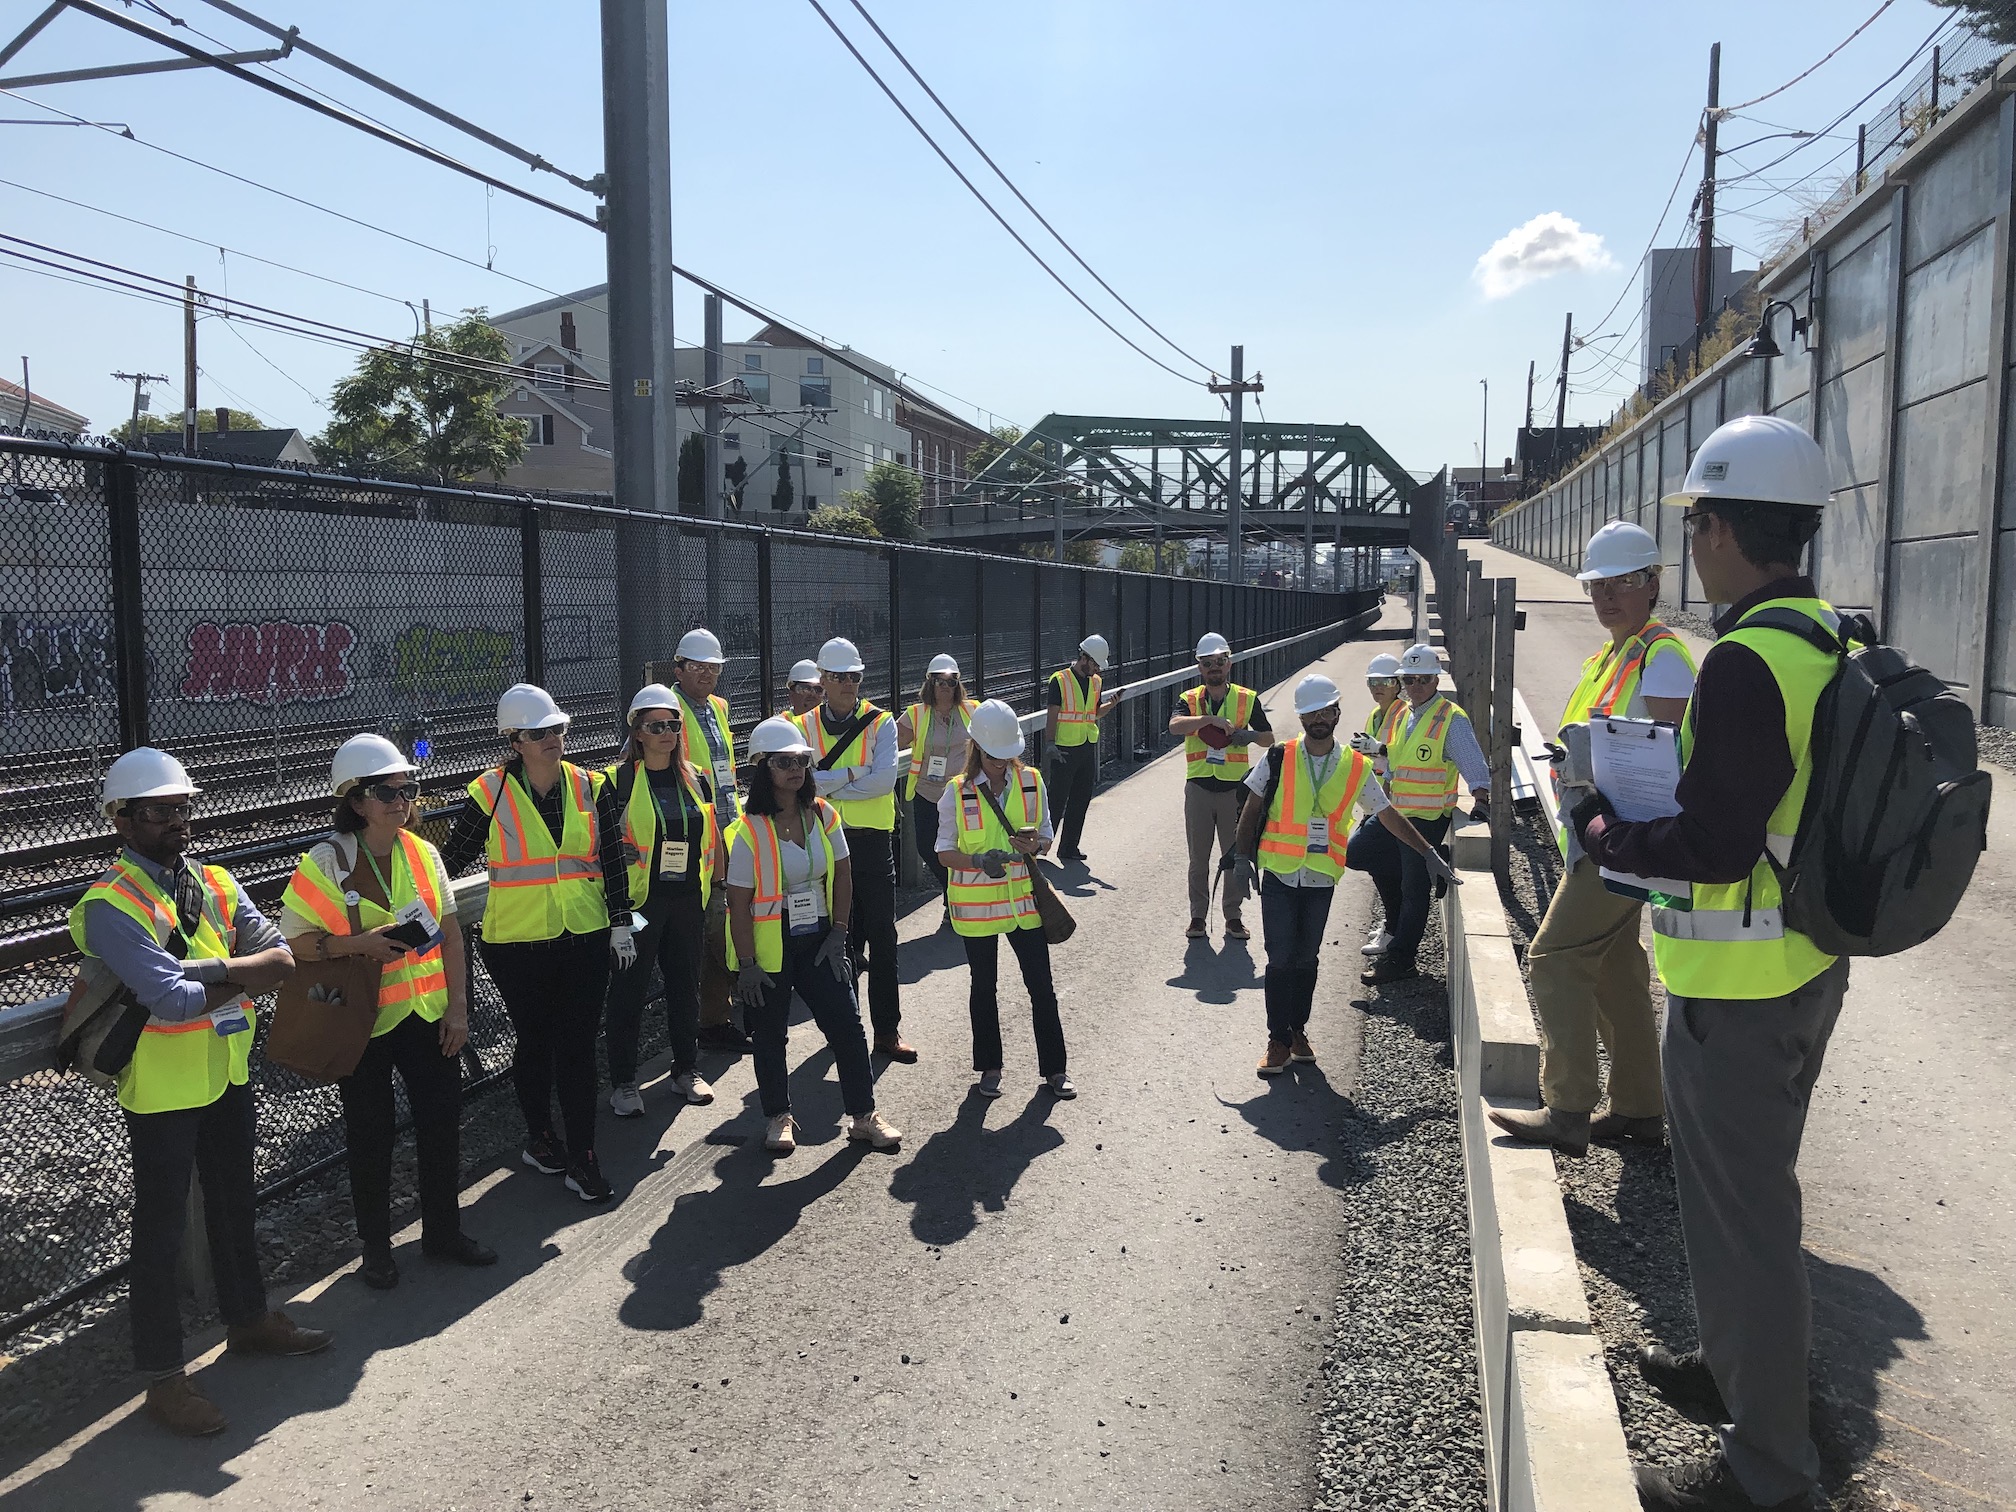 A crowd of people wearing bright construction vests and helmets listens to a man wearing a backpack at the intersection of the Community Path, which runs alongside the railroad tracks, and a second path that leads uphill to street level, above the tracks. In the distance is the Cross Street bridge.